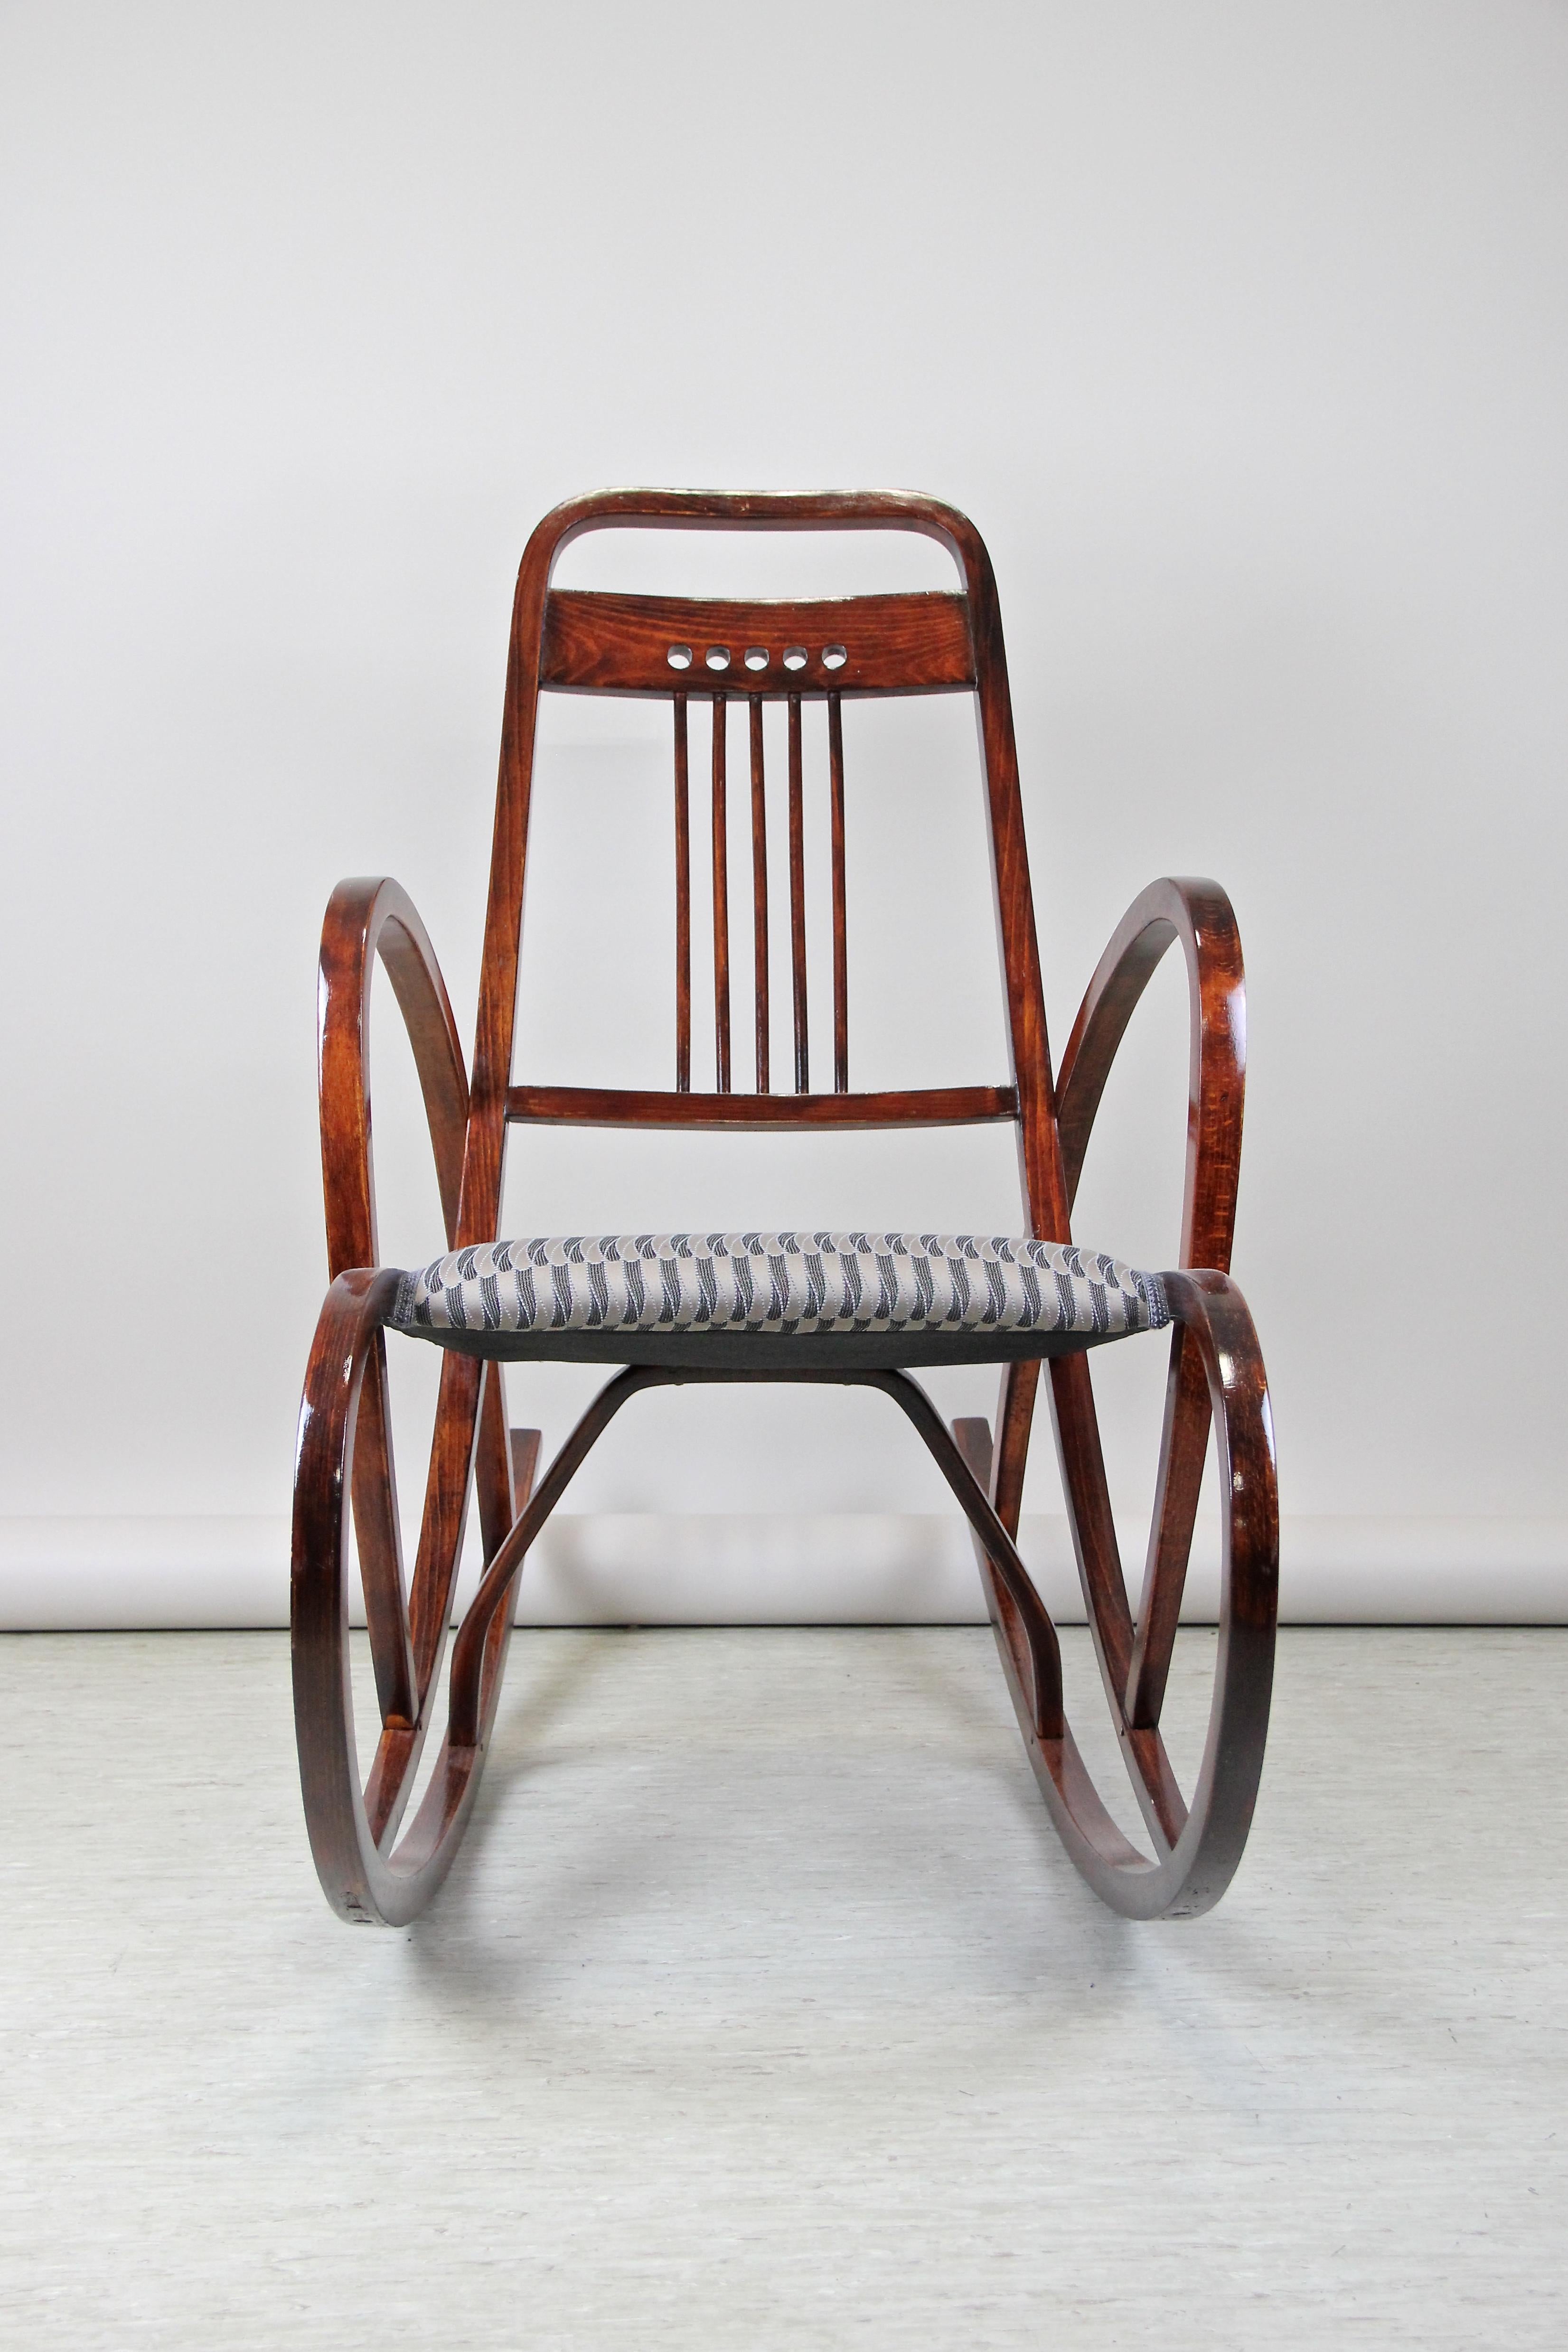 Outstanding rocking chair, model No. 511 out of the famous company of Thonet Vienna/ Austria circa 1905, designed by world renown architect Marcel Kammerer. The very pleasing design makes the bentwood chair an absolute timeless seating masterpiece